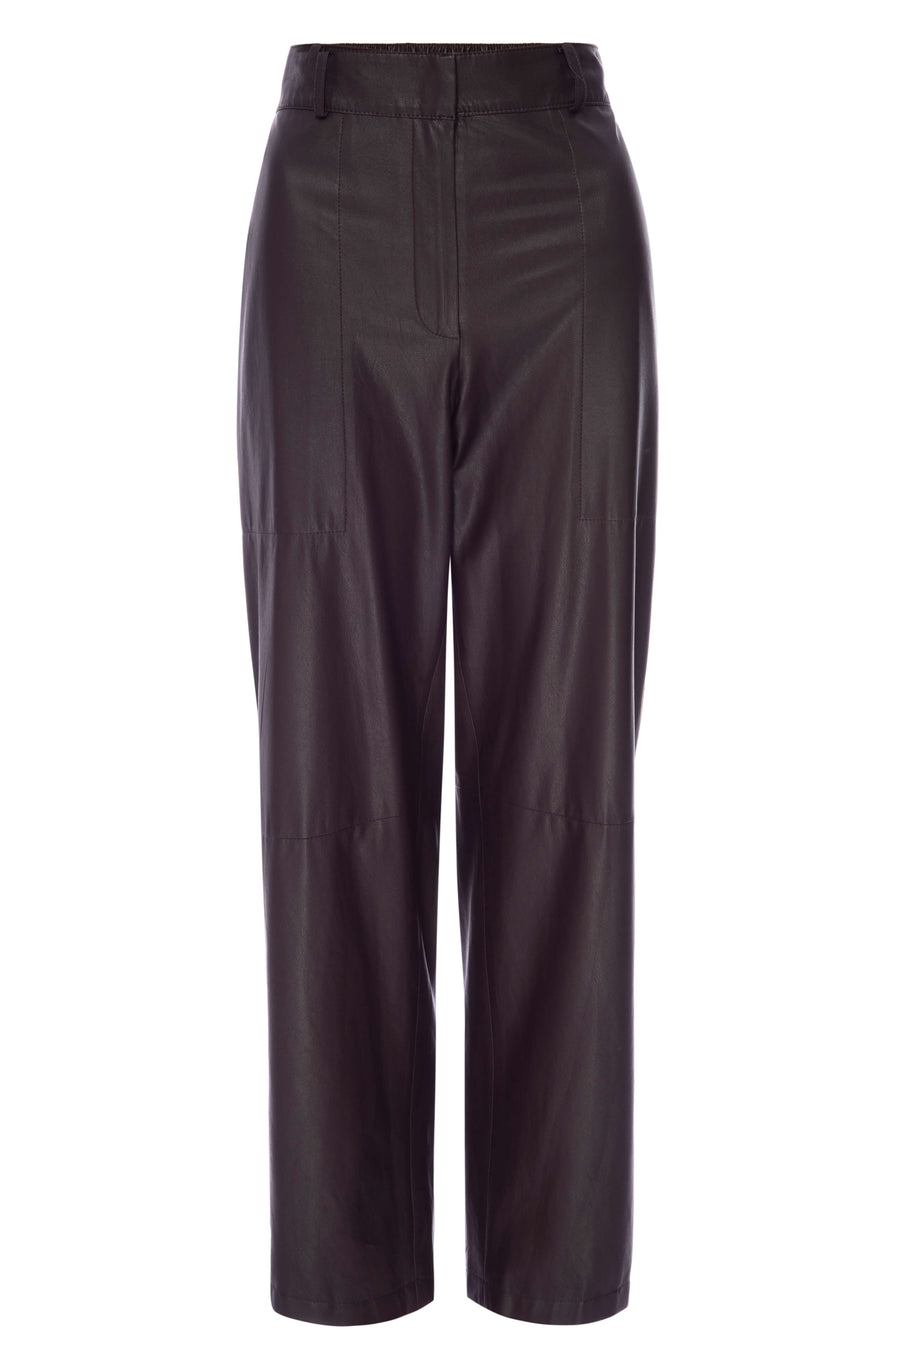 Stone vegan leather brown cropped pant flat view